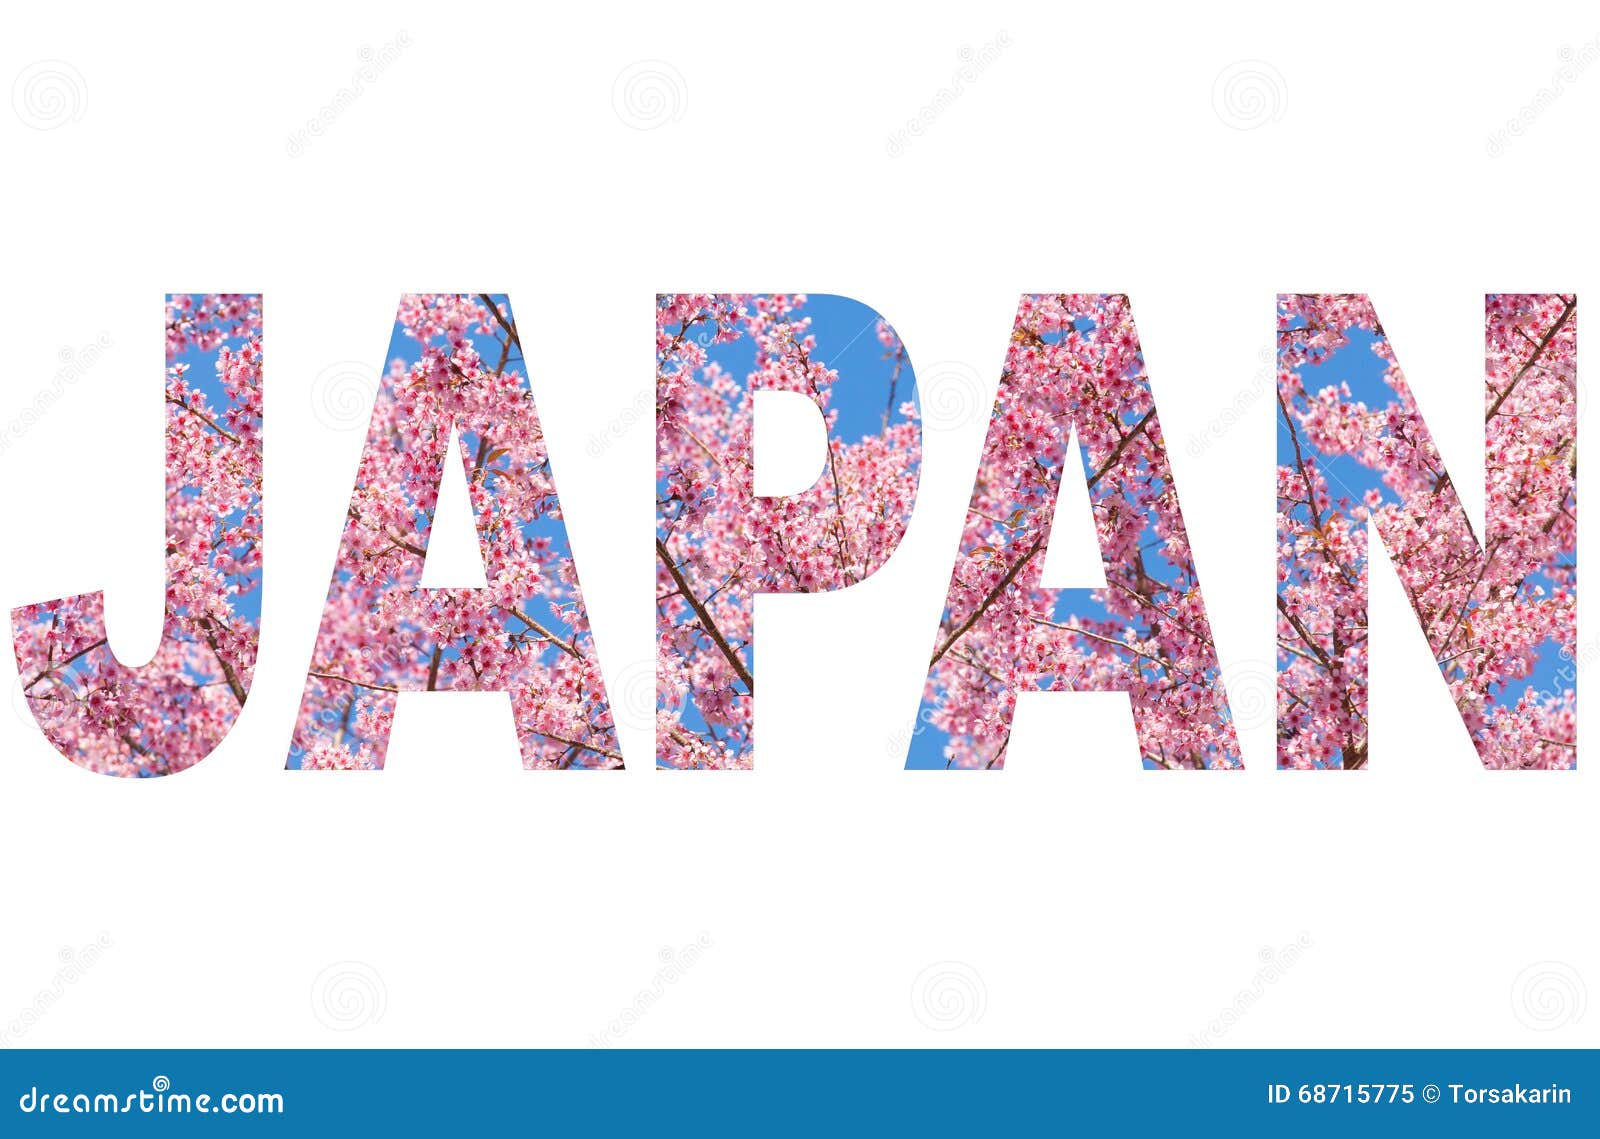 Japan Country Name Sign Photos Free Royalty Free Stock Photos From Dreamstime